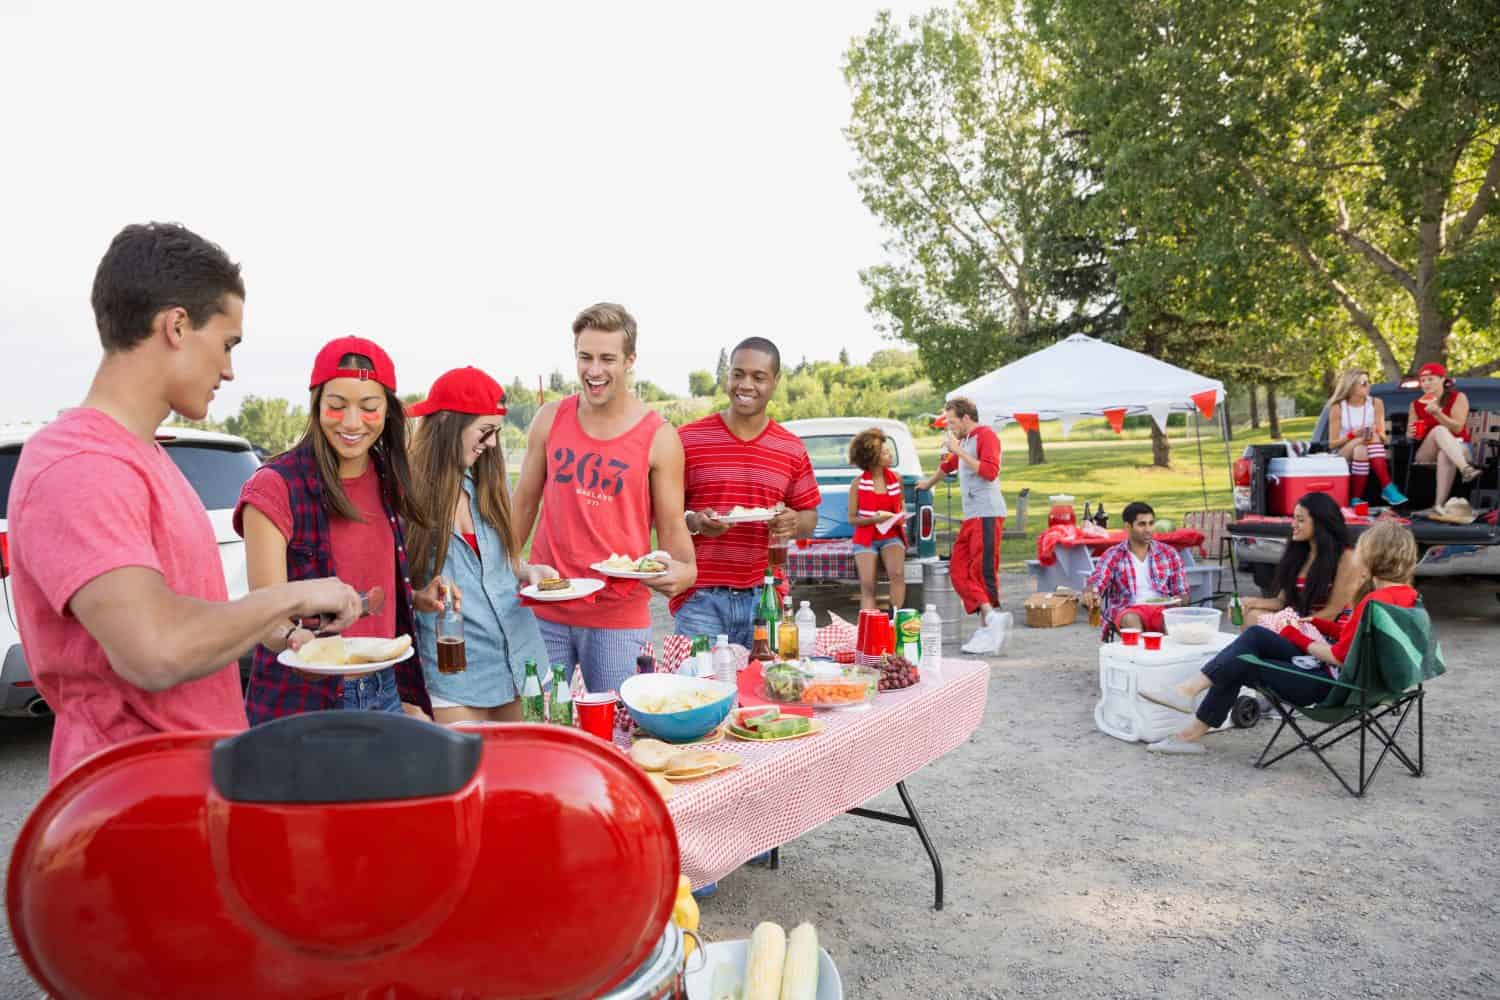 Friends eating at tailgate barbecue in field